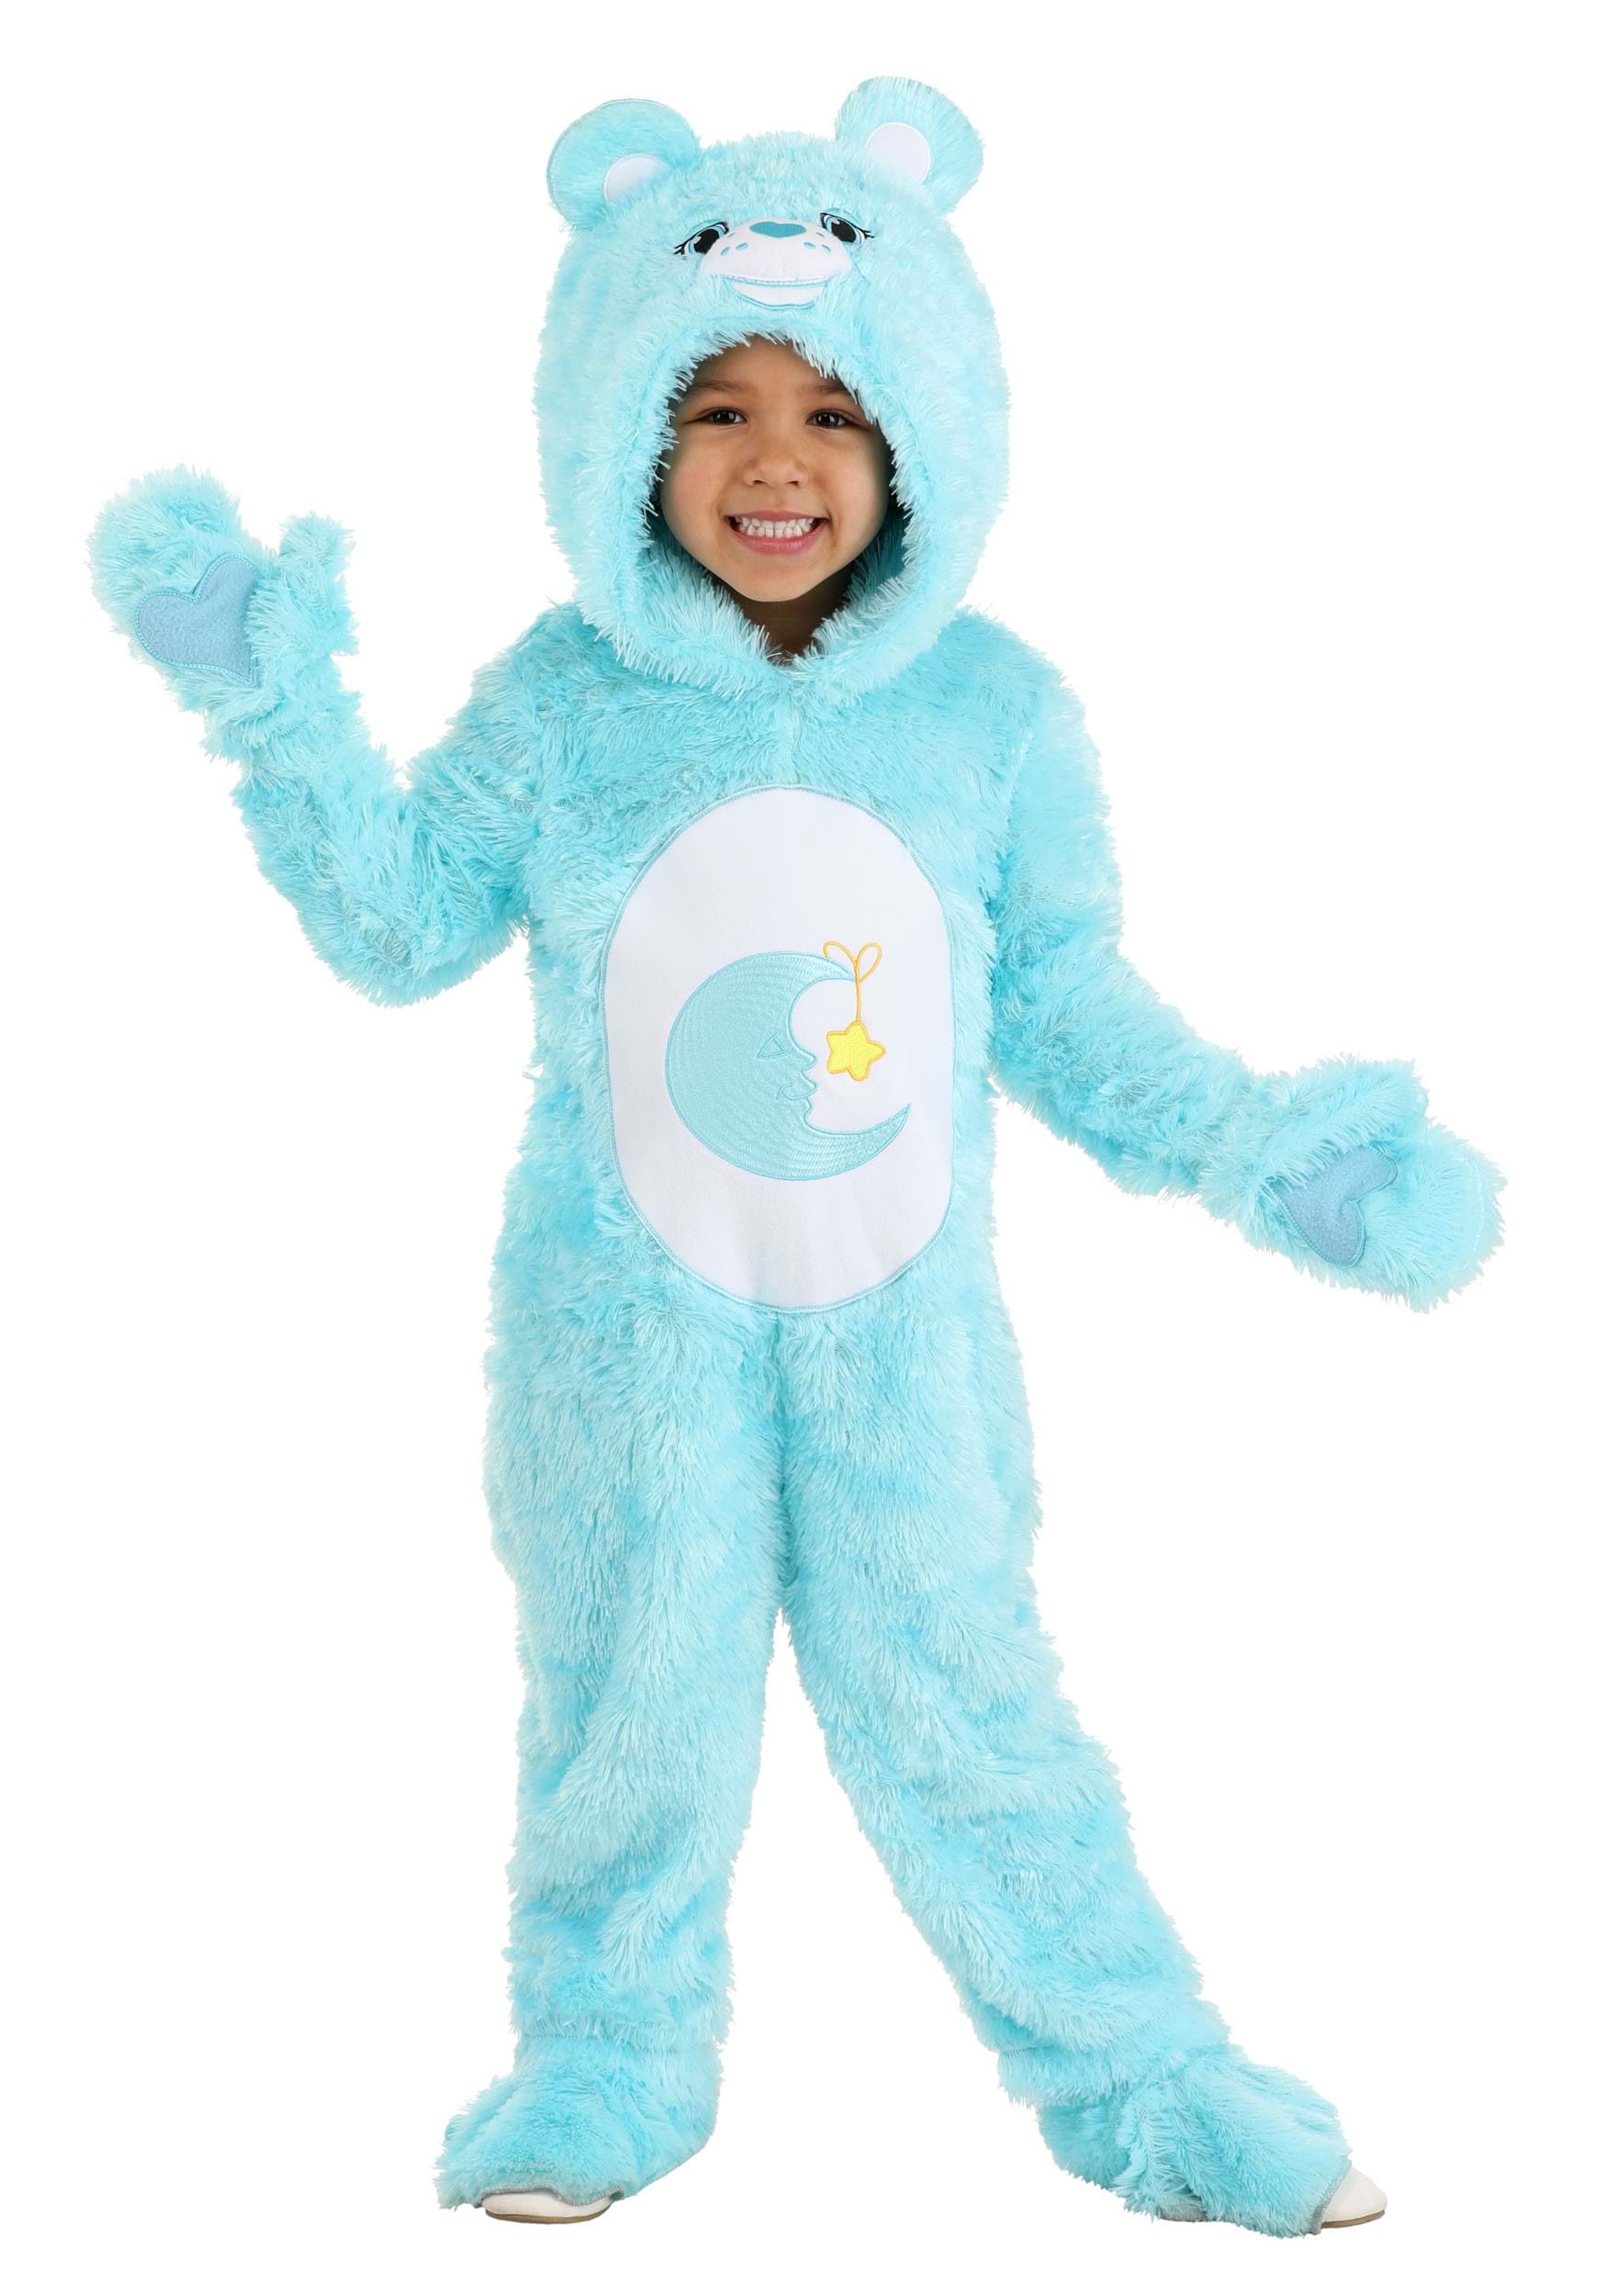 Photos - Fancy Dress Toddler FUN Costumes Care Bears Classic Bedtime Bear Costume for Toddlers Blue/ 